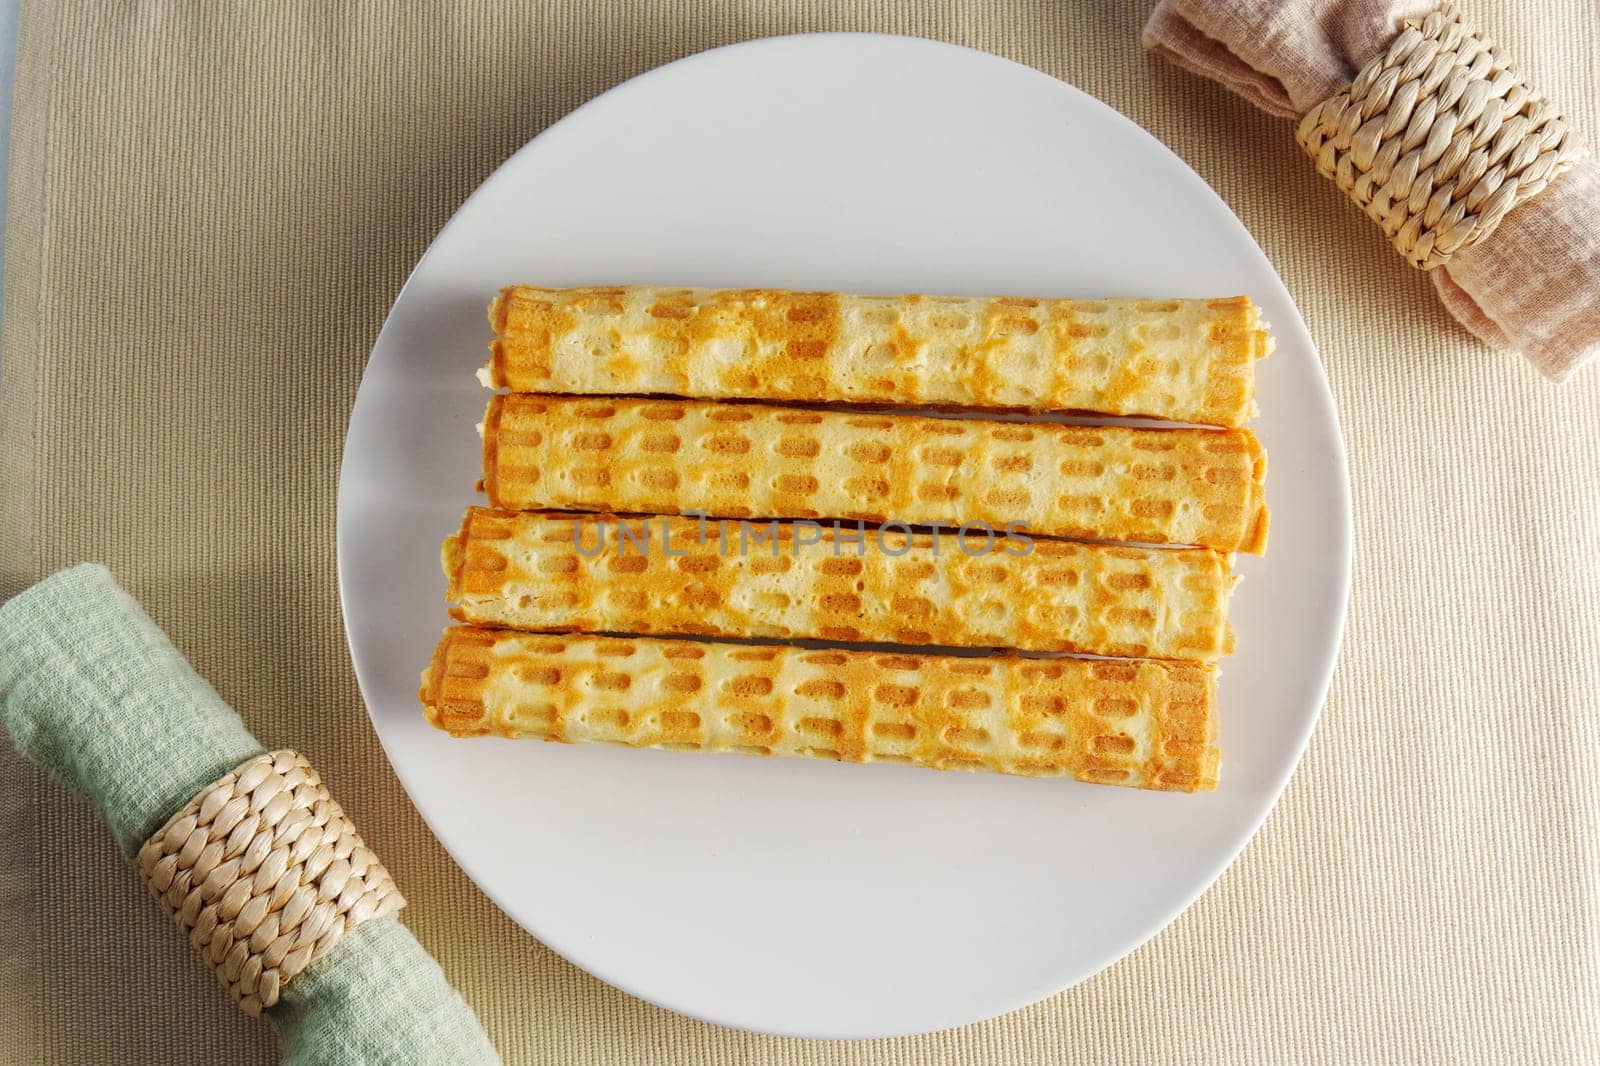 Ethereal Morning Delight: A Gourmet Stack of Golden Waffles on a Crisp White Plate